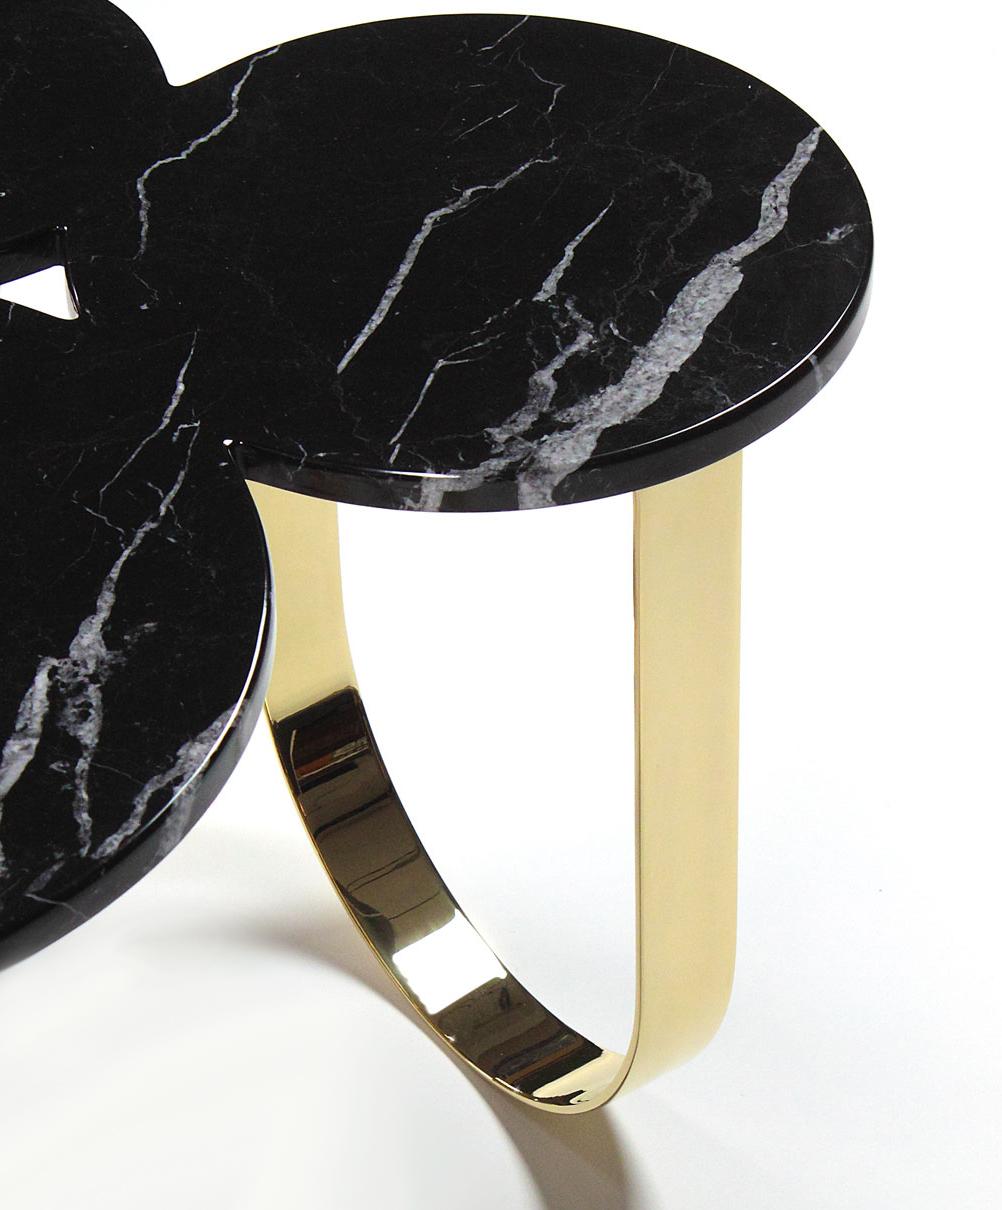 The 'Cloud' is a spectacular side table with structure in mirror polished brass and top in Marquinia marble. 
The mirror-like finishing of the brass creates different perceptions of this particular material and allows interesting reflections of